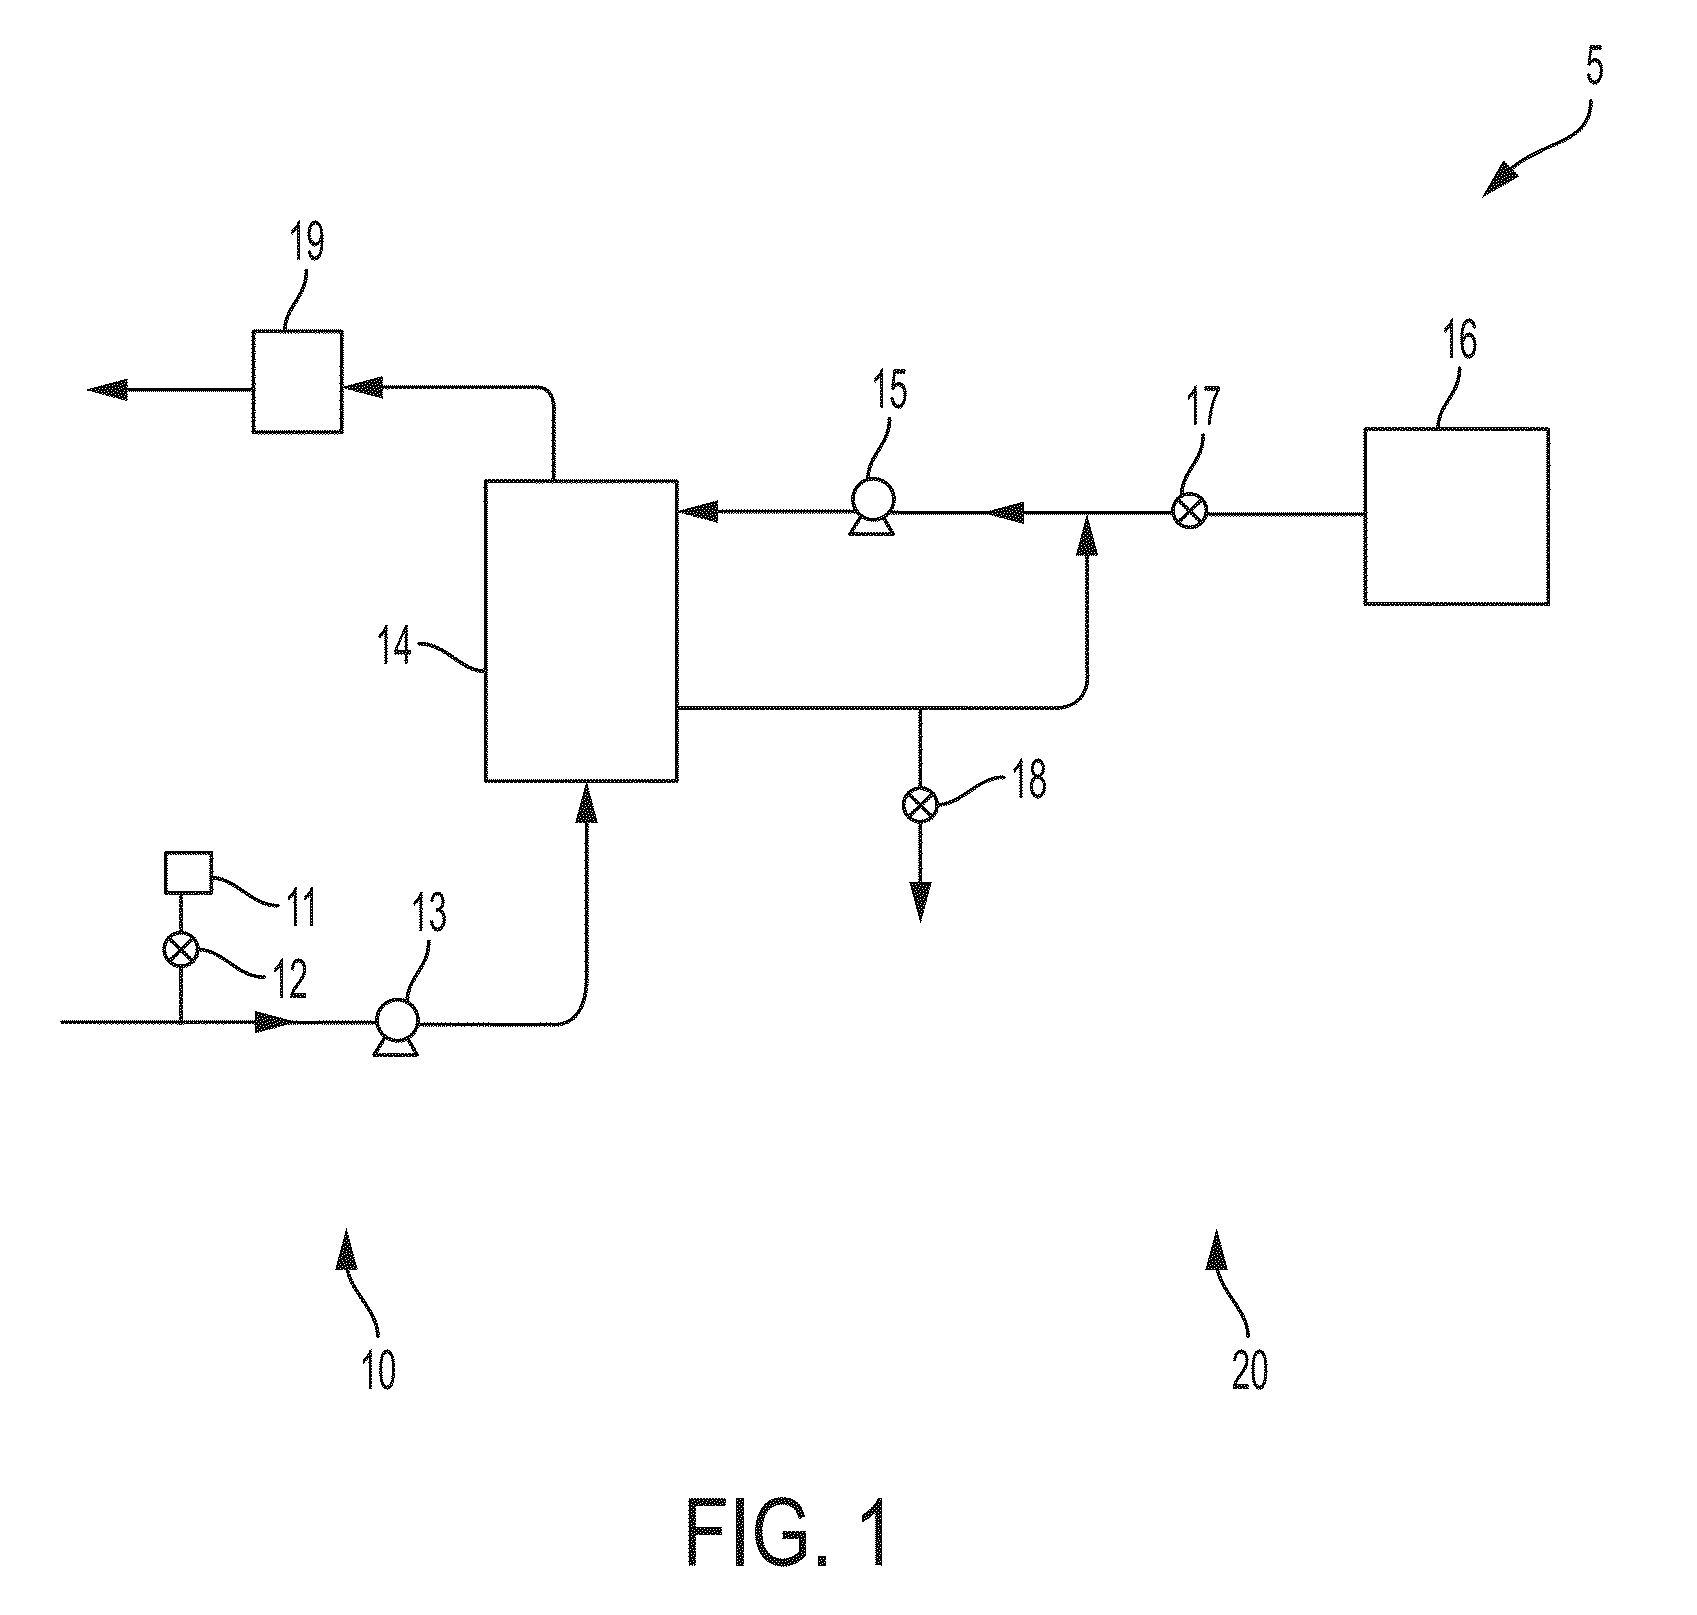 Control Systems and Methods for Blood or Fluid Handling Medical Devices